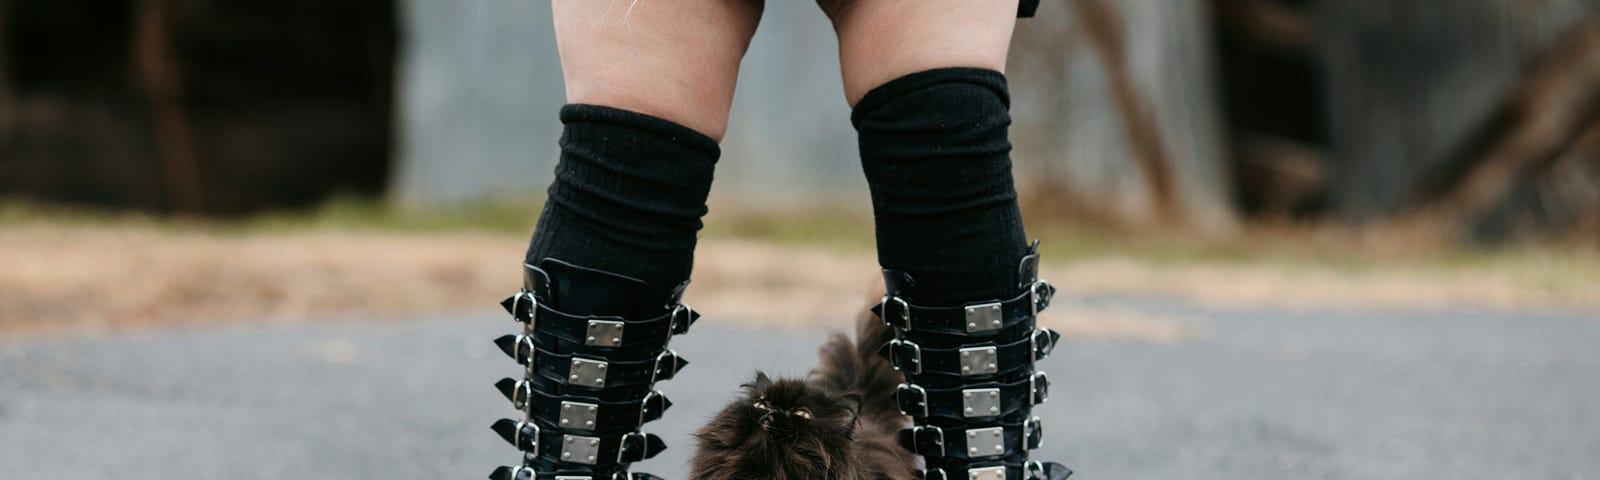 A woman is seen from the legs down, a black skirt pulled up revealing black spiky boots, long black socks, and a cat standing in between her feet.